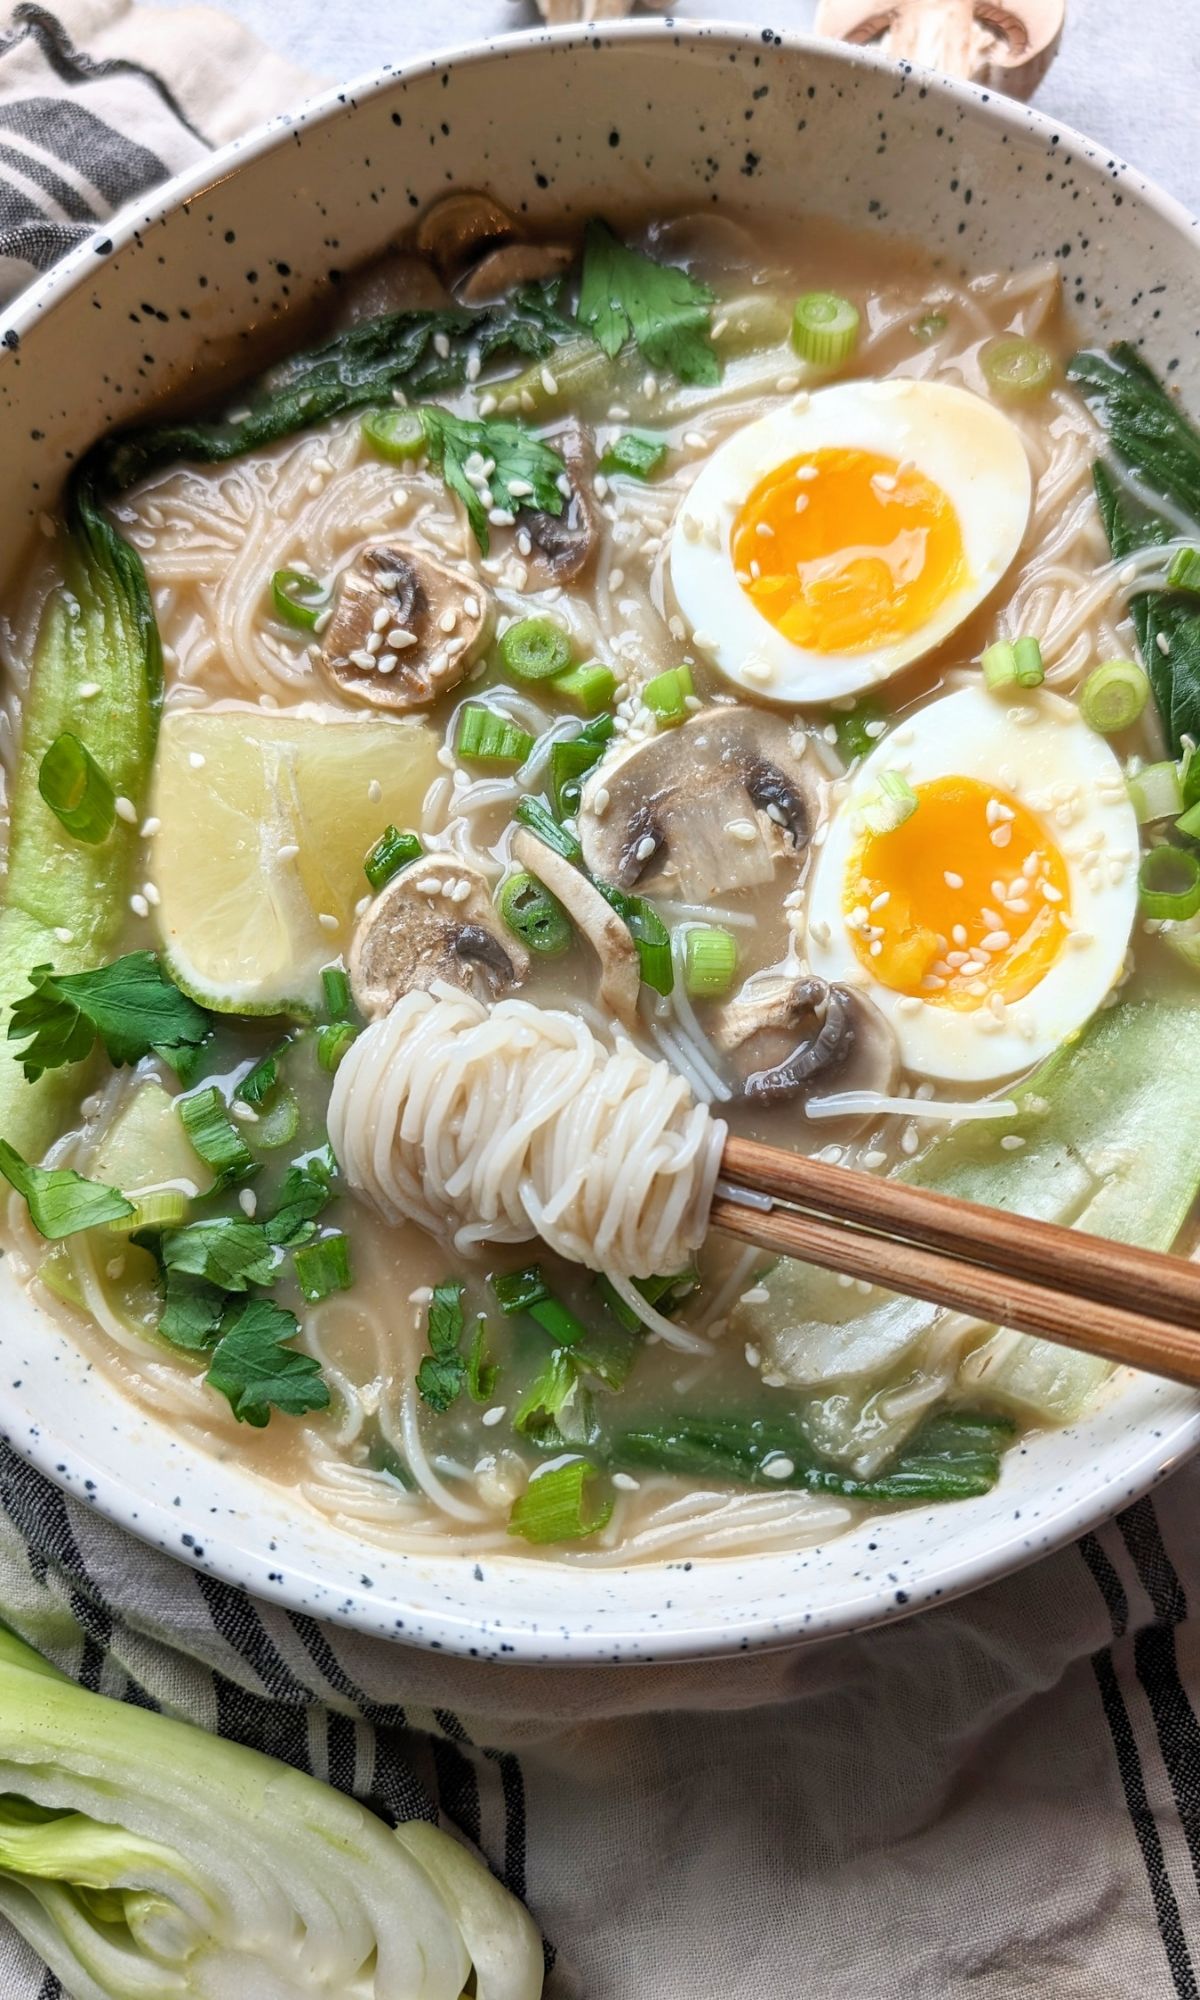 low salt ramen recipe with low sodium soup ingredients easy homemade ramen less salt and less sodium soup ideas to make at home for lunch or dinner with rice noodles and a ramen egg